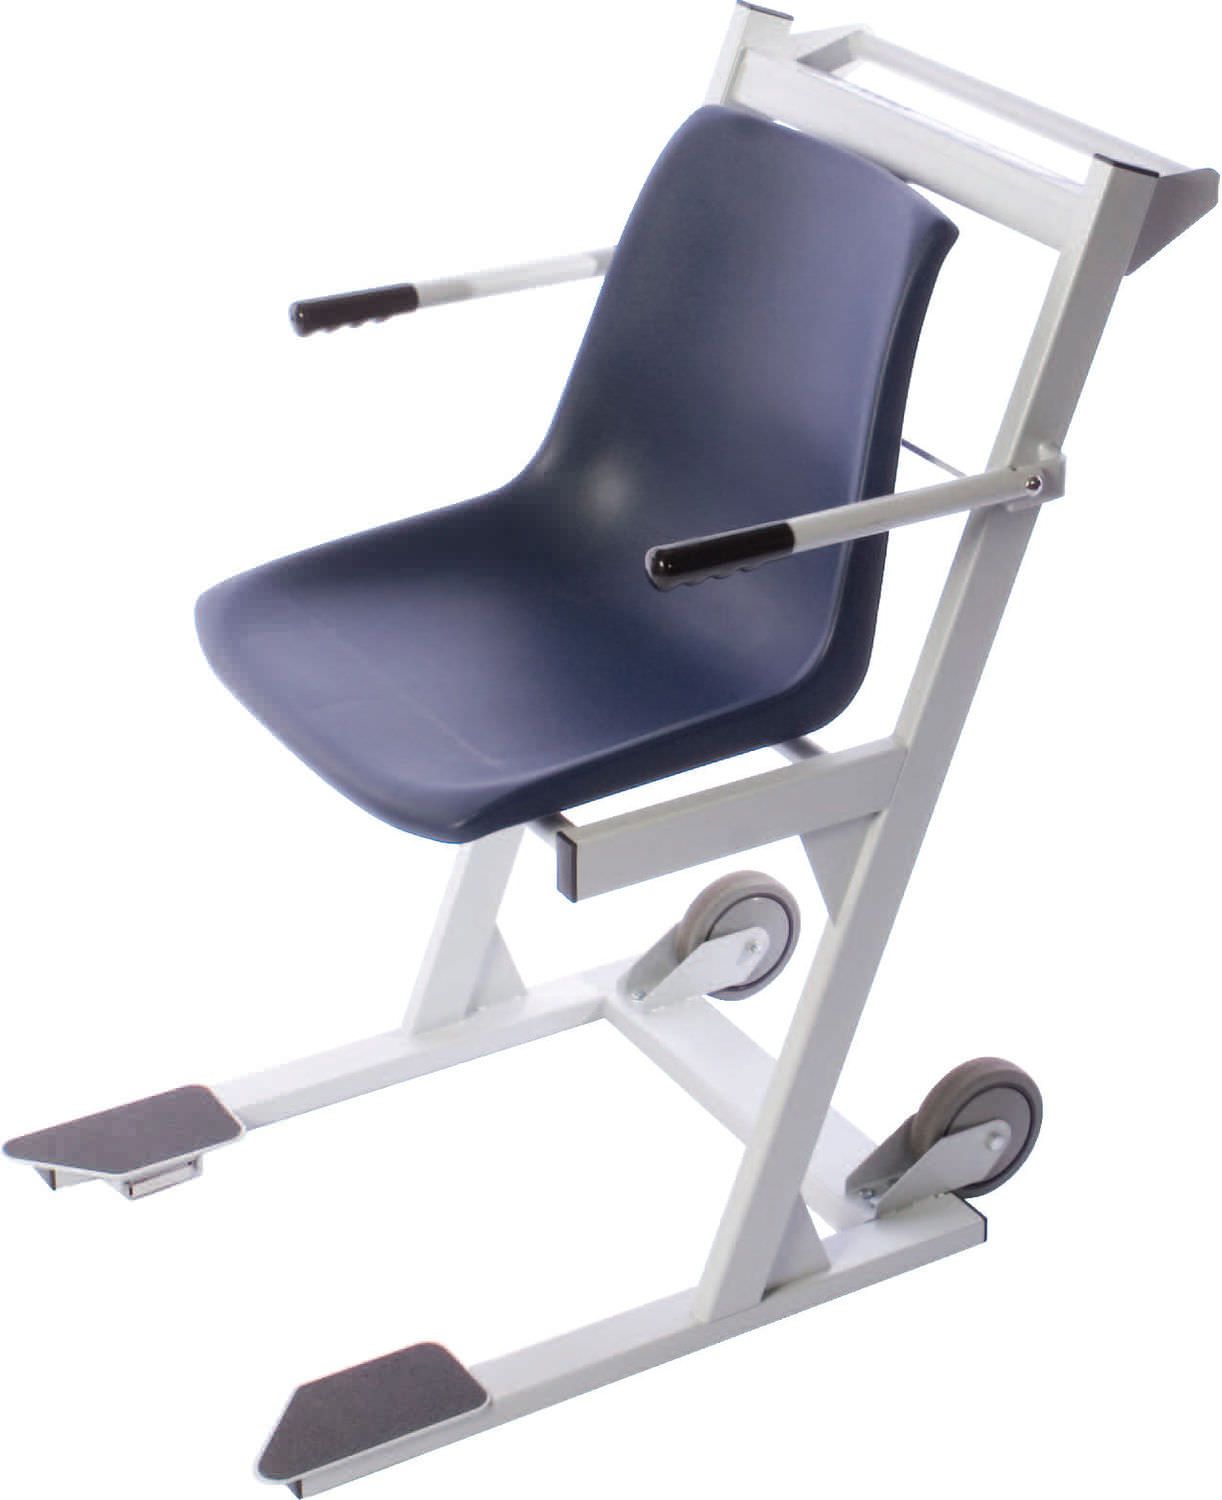 Electronic patient weighing scale / chair 181 Kg | SR730 SR Instruments